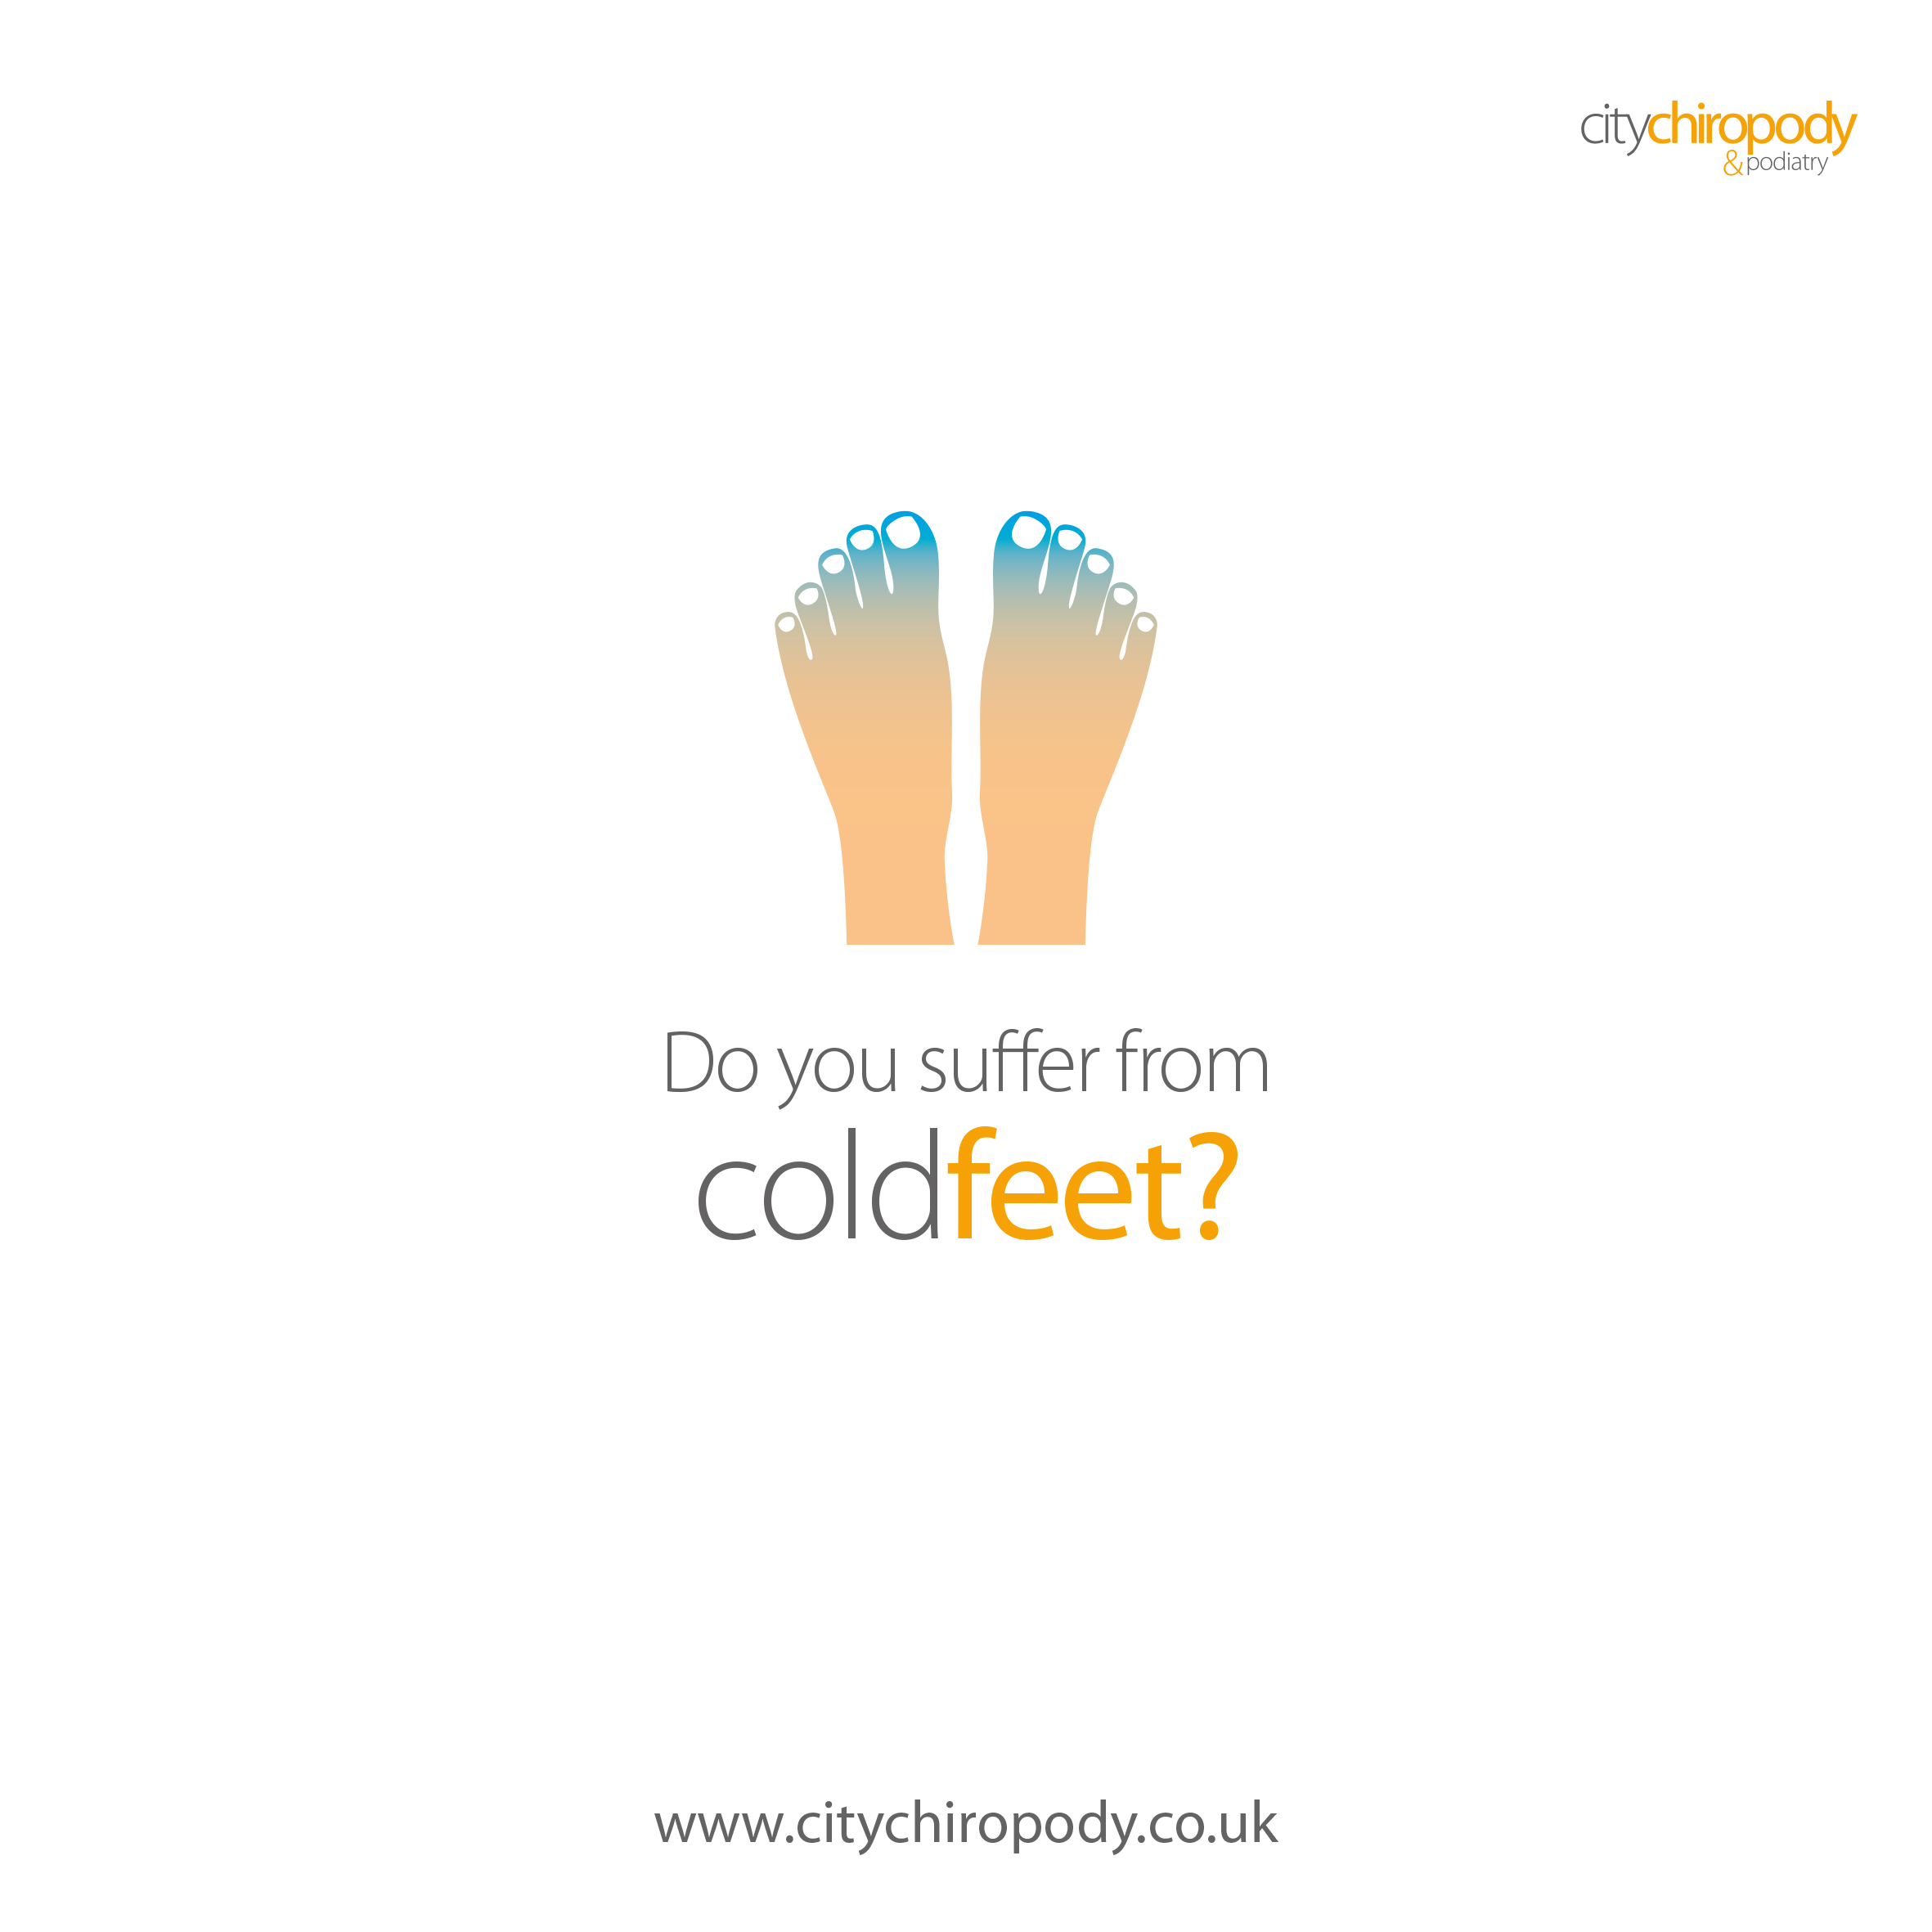 City Chiropody "Cold Feet?" Graphic